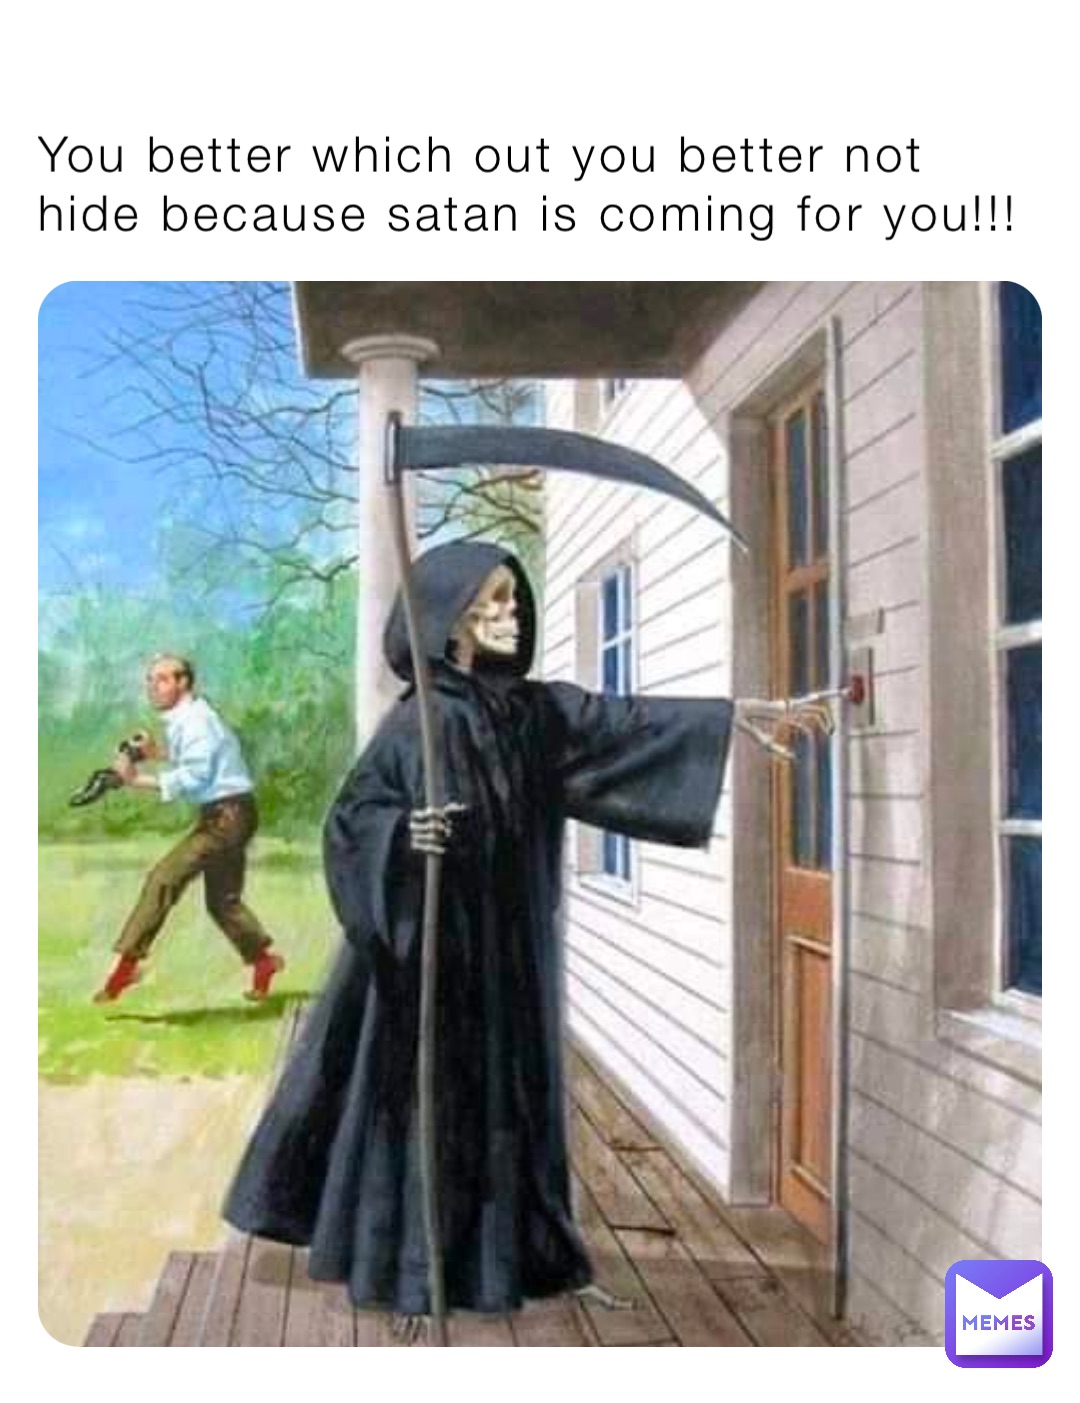 You better which out you better not hide because satan is coming for you!!!